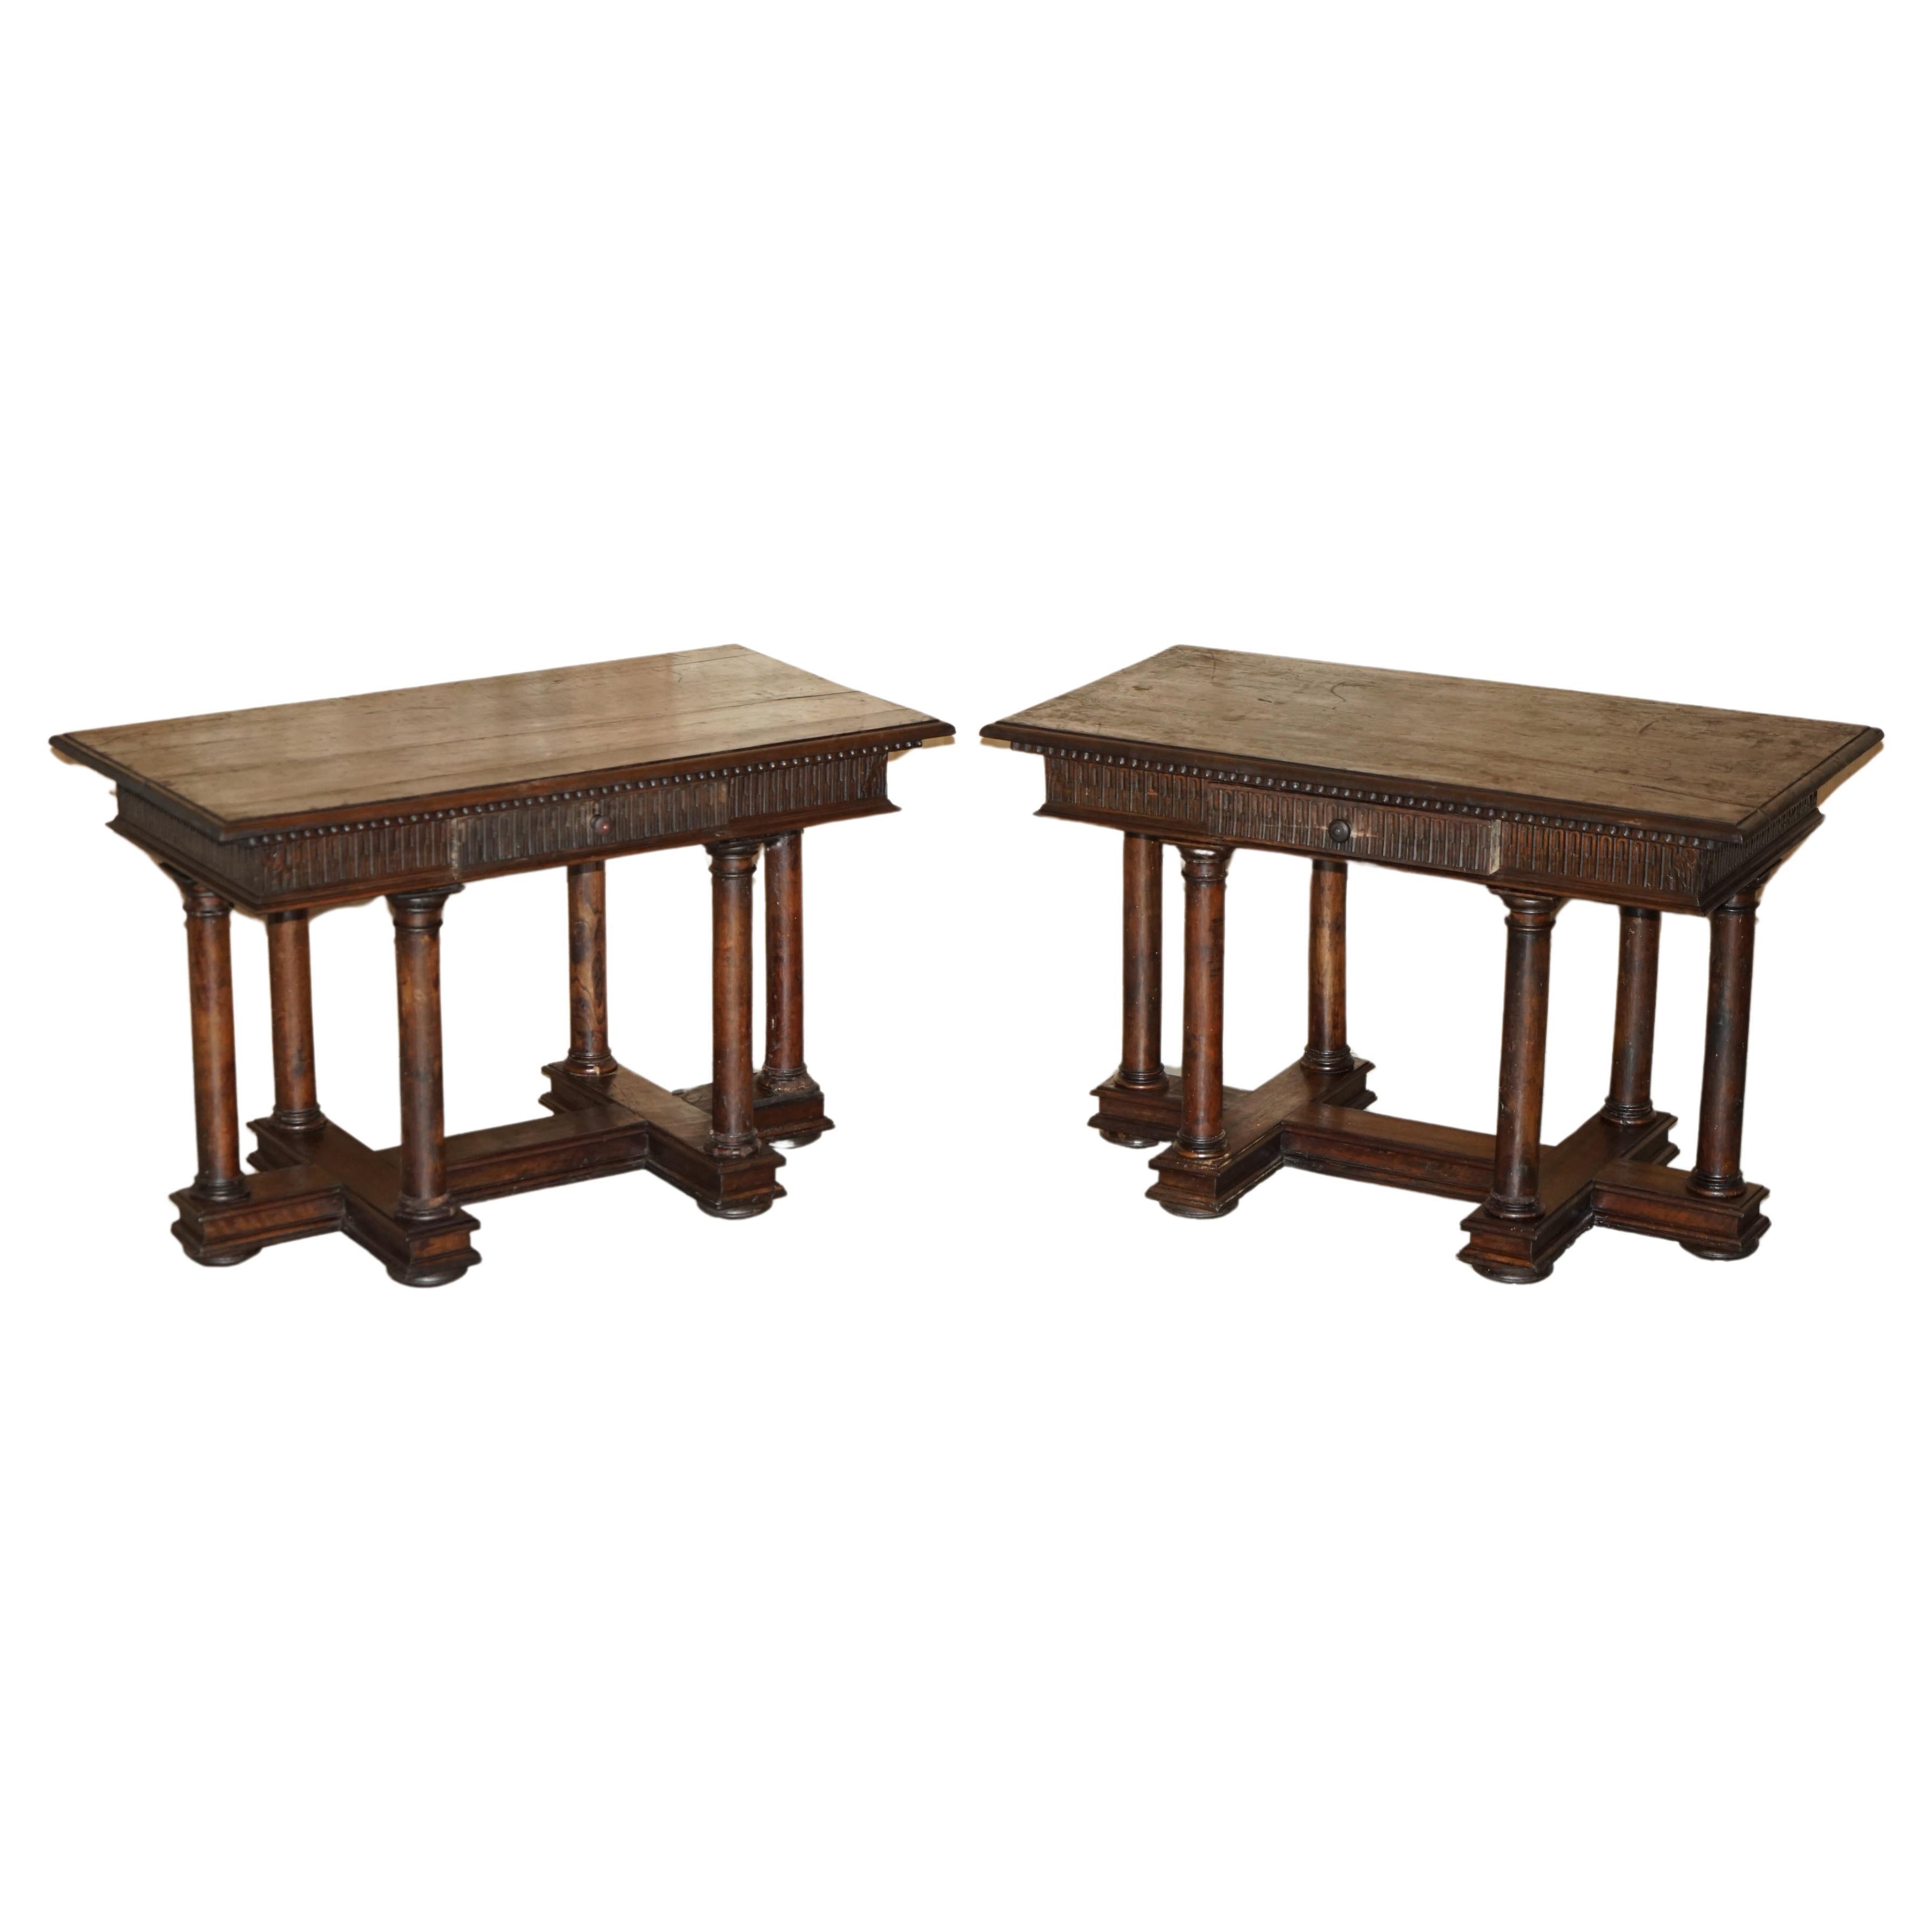 PAIR OF IMPORTANT 17TH CENTURY FRENCH RENAISSANCE SERViNG TABLES UNRESTORED For Sale